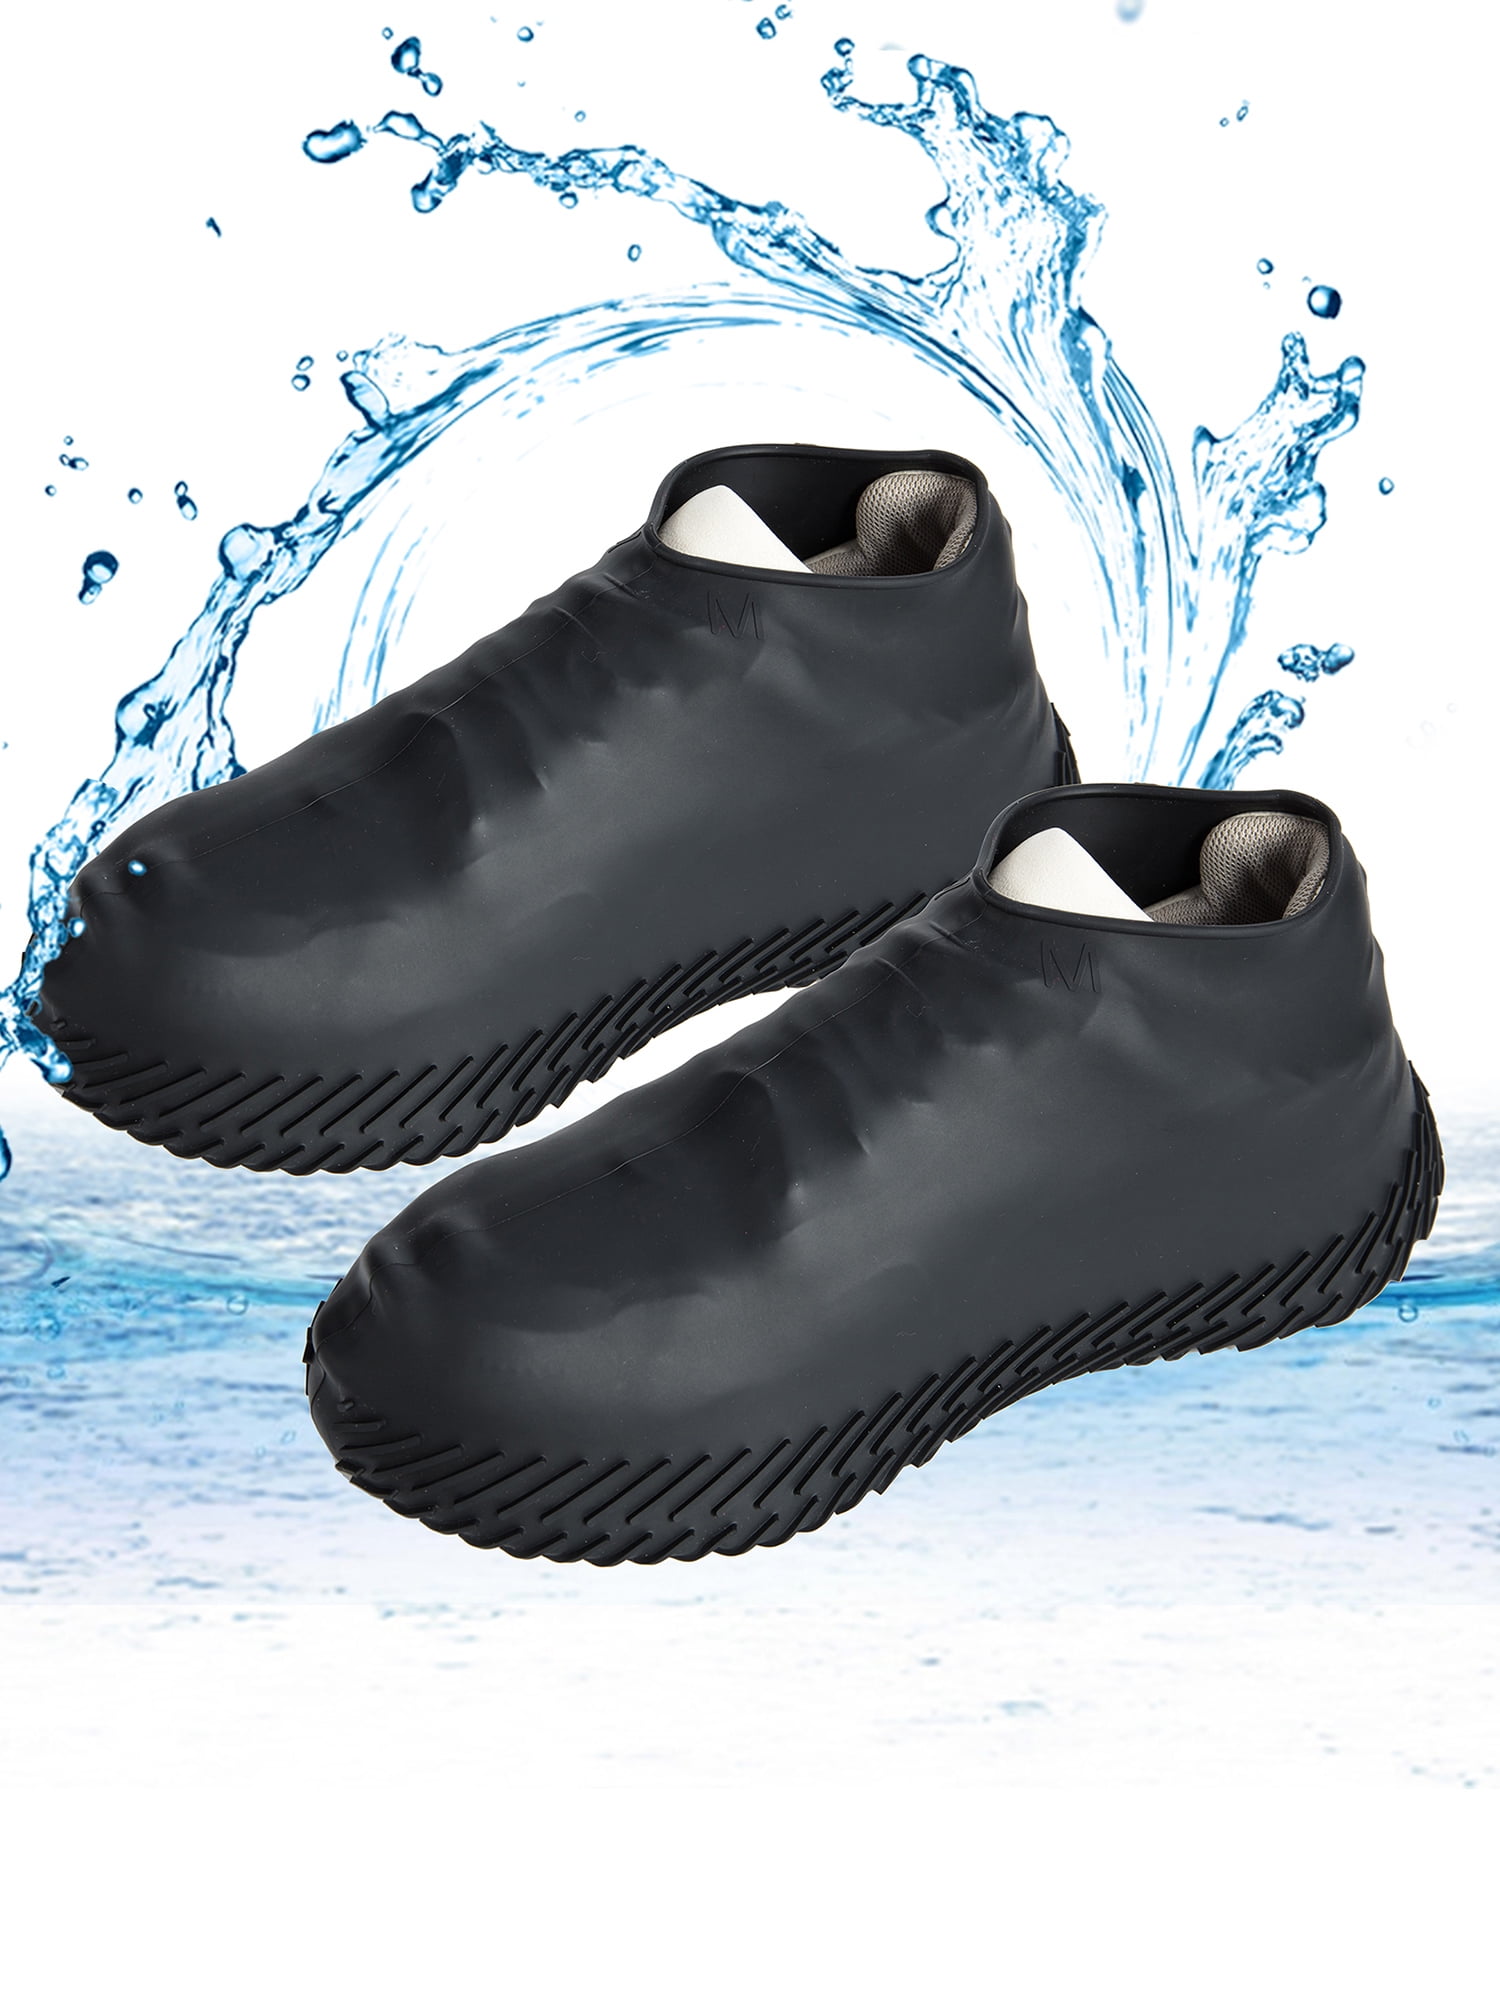 Reusable Silicone Overshoes Waterproof Shoe Covers Boot Cover Protector NonSlip 